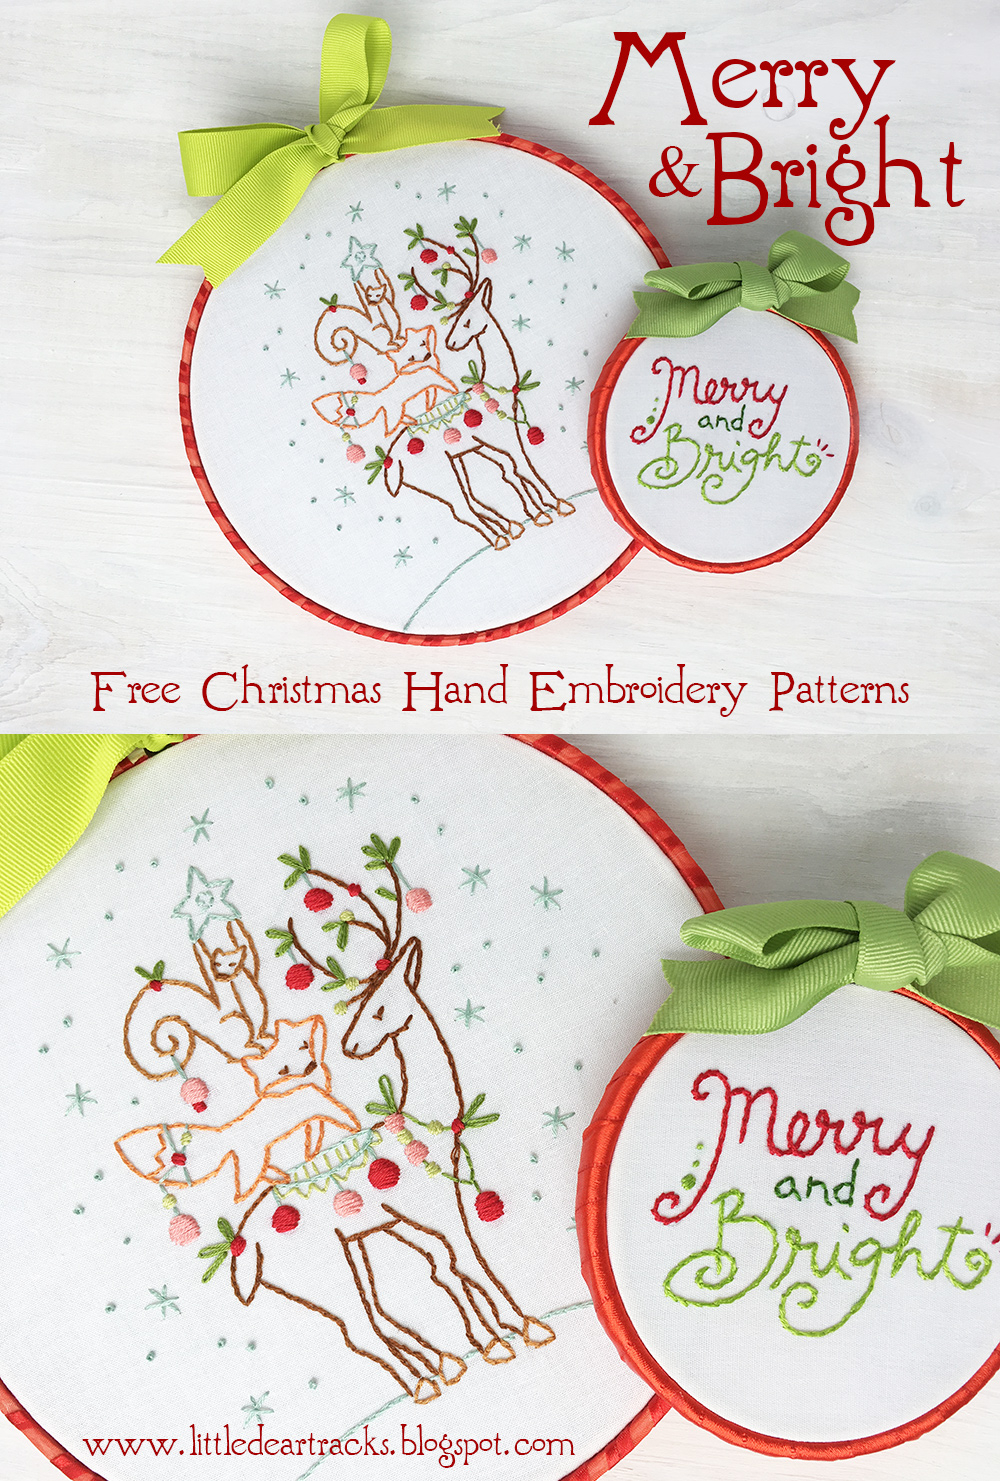 Fun Embroidery Patterns Little Dear Tracks Free Christmas Embroidery Patterns